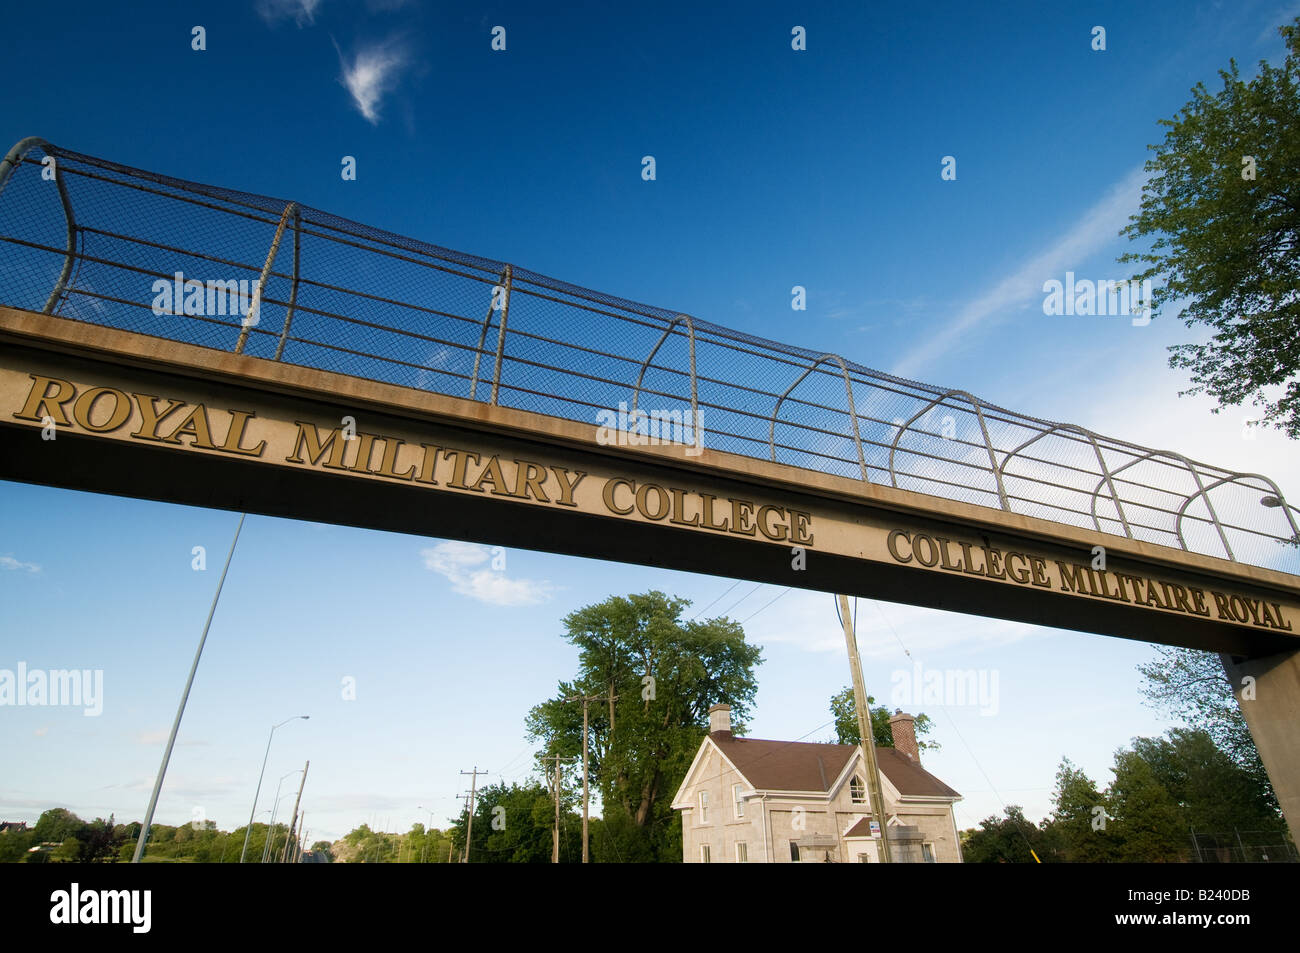 The Royal Military College sign in Kingston, Ontario, Canada, serves as a landmark and a pedestrian bridge. Stock Photo